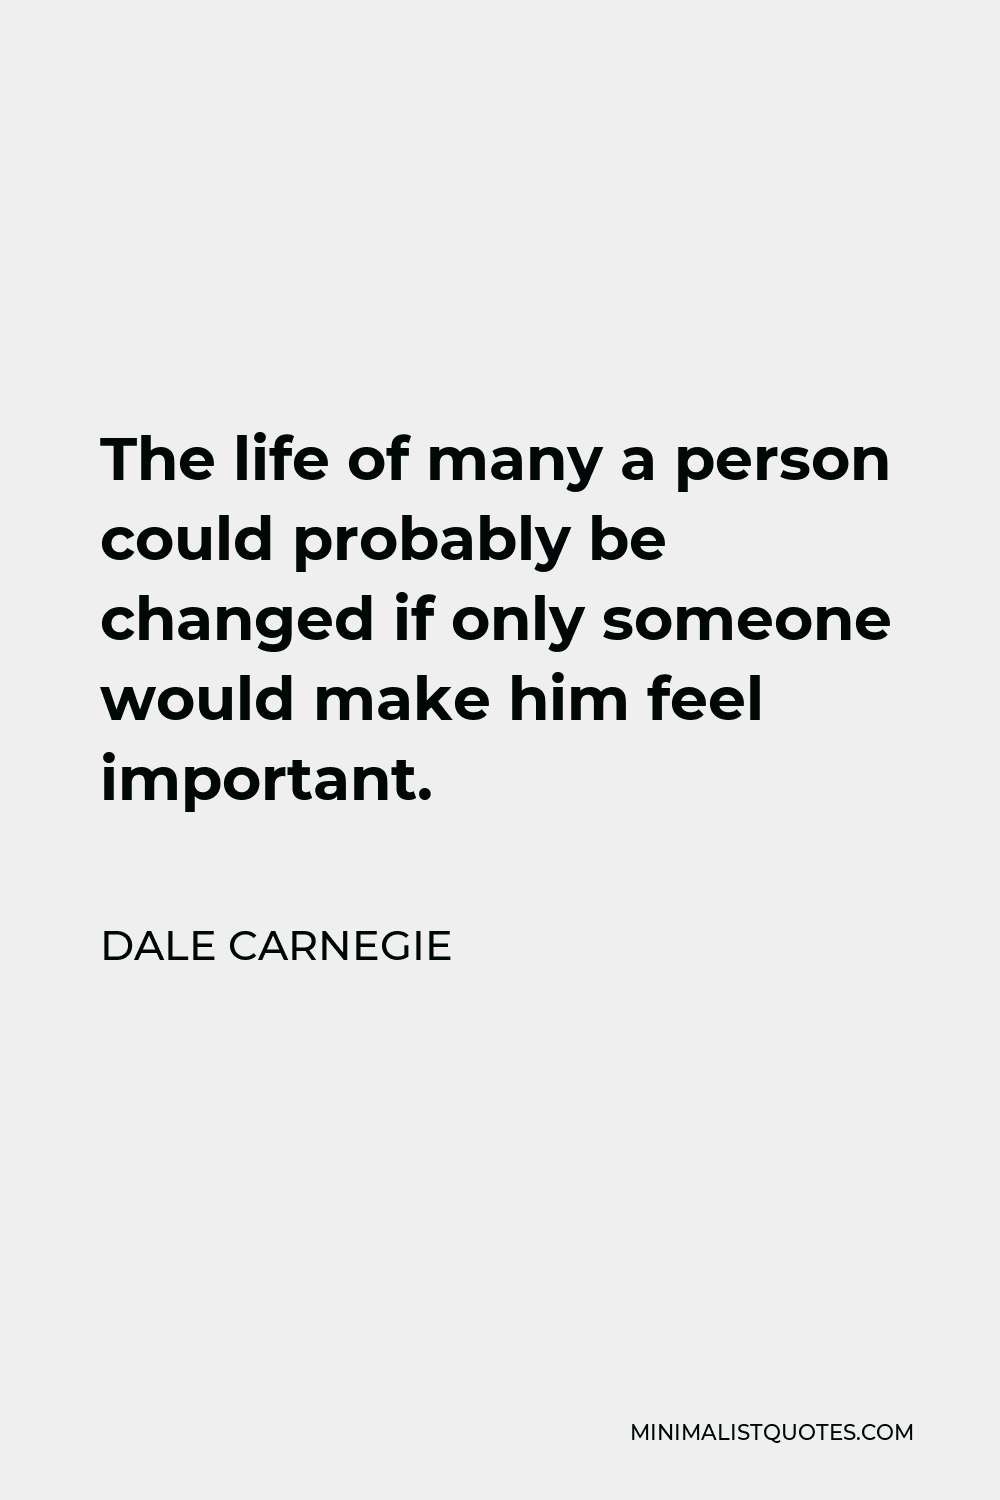 Dale Carnegie Quote - The life of many a person could probably be changed if only someone would make him feel important.